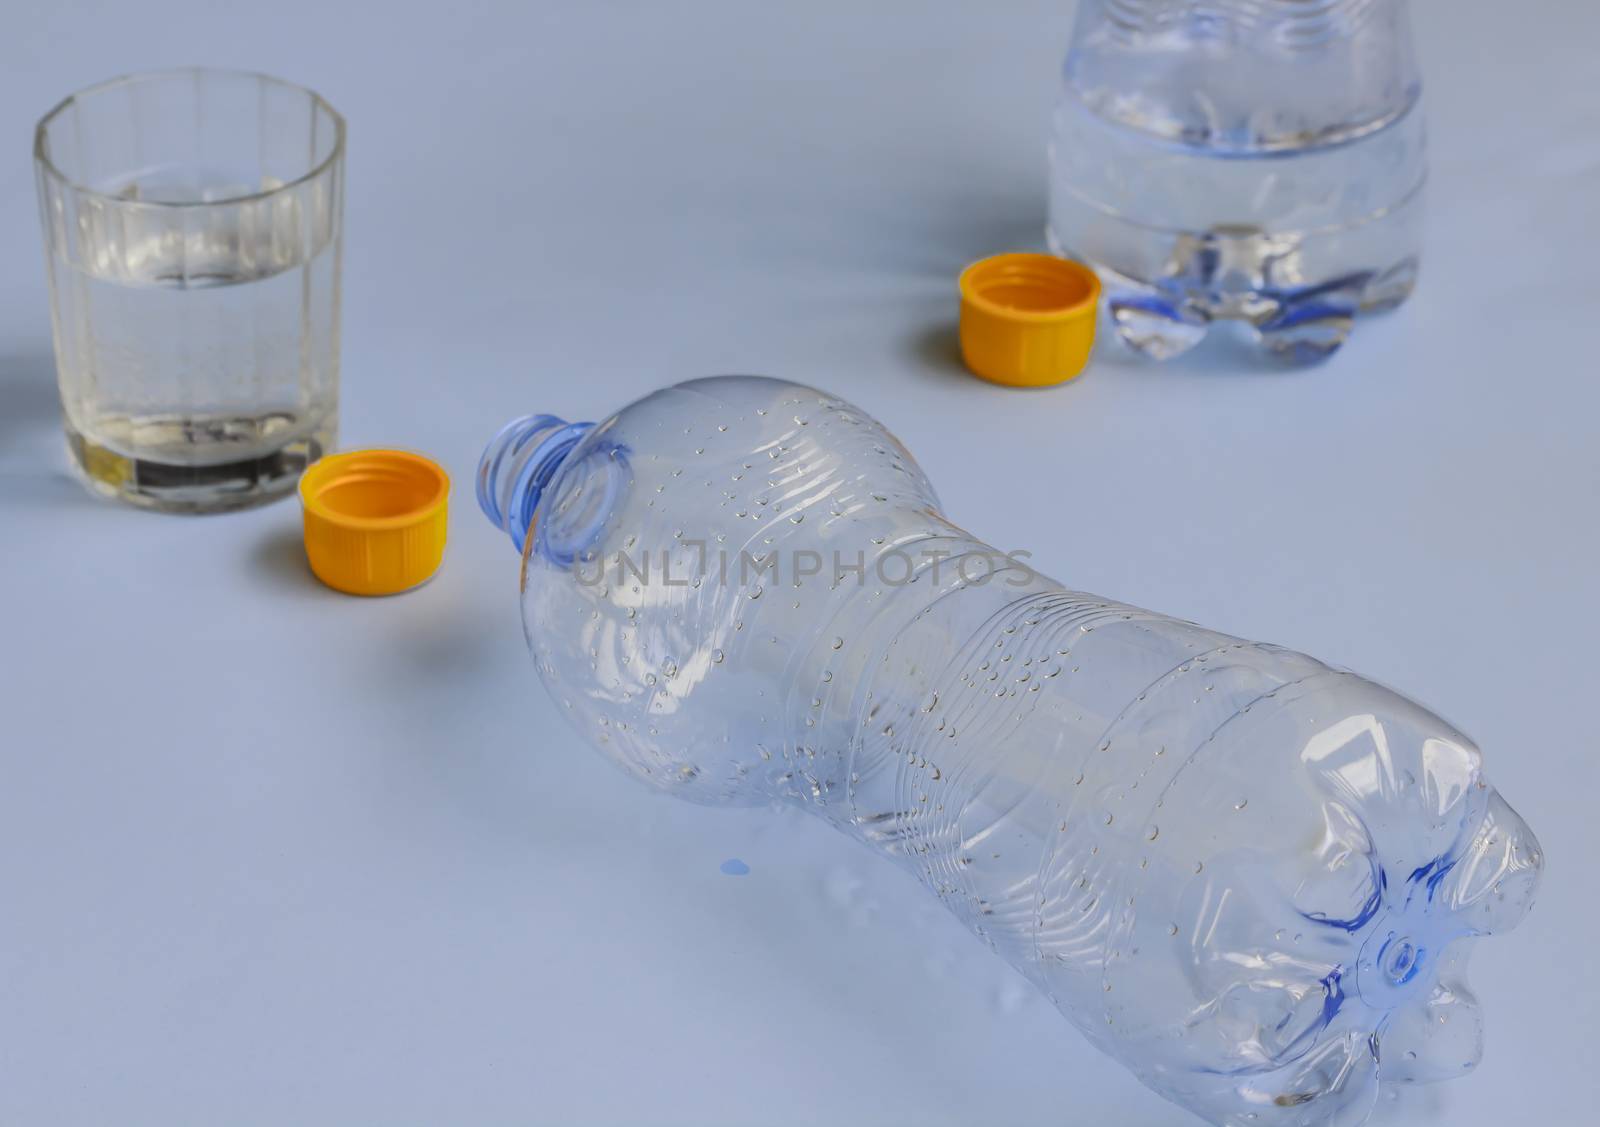 two bottles of water drained ,with orange cap and the glass